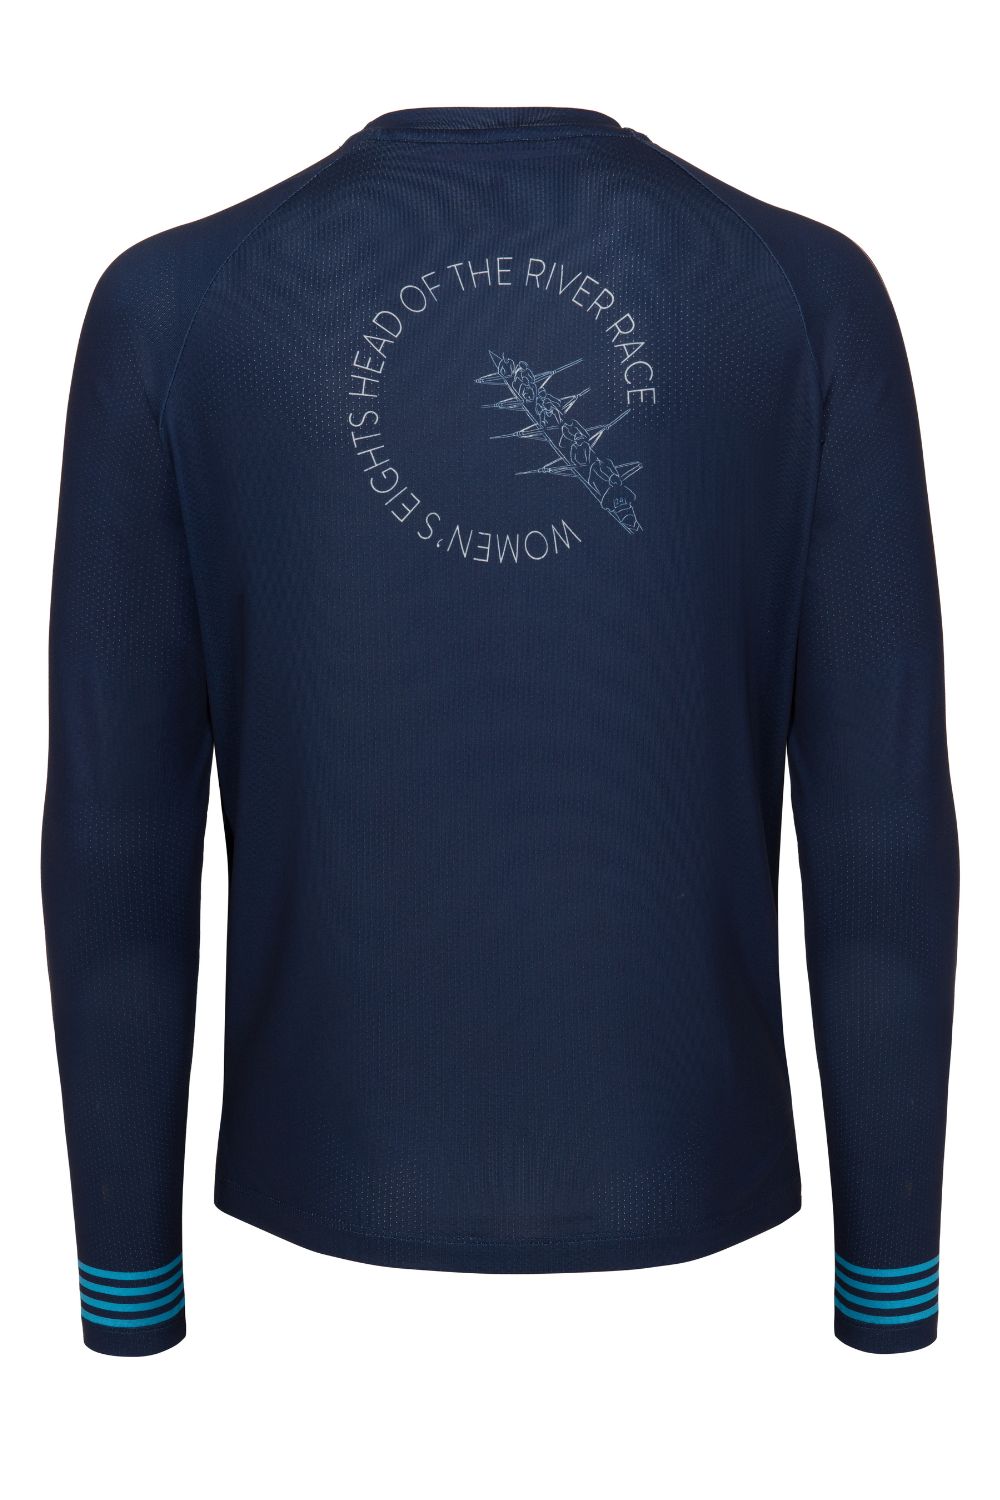 The WEHORR Carbonised Bamboo Top (Women's)